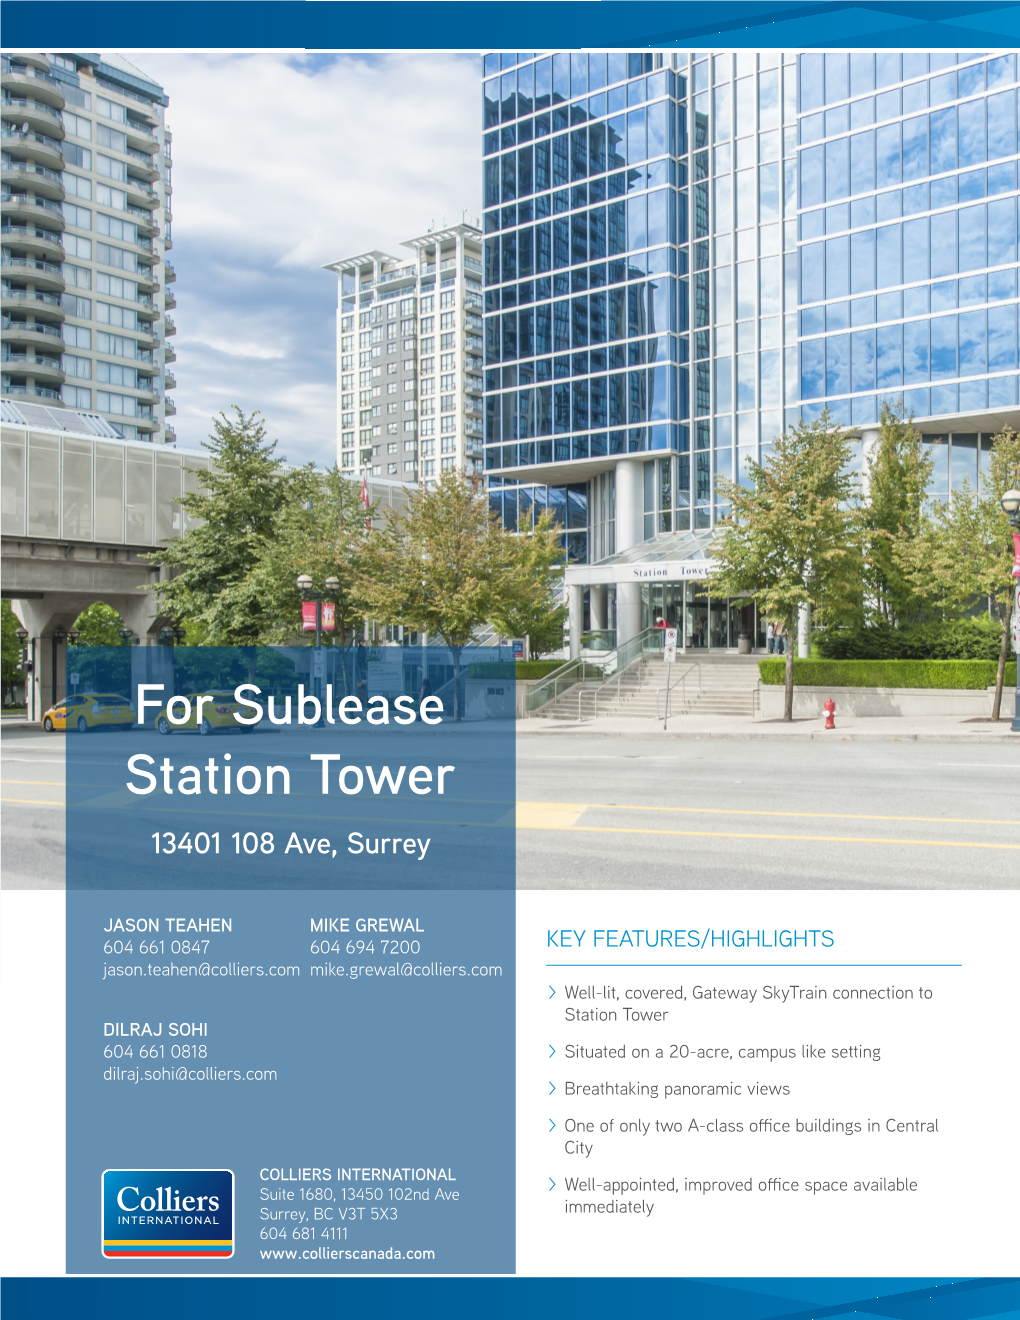 For Sublease Station Tower